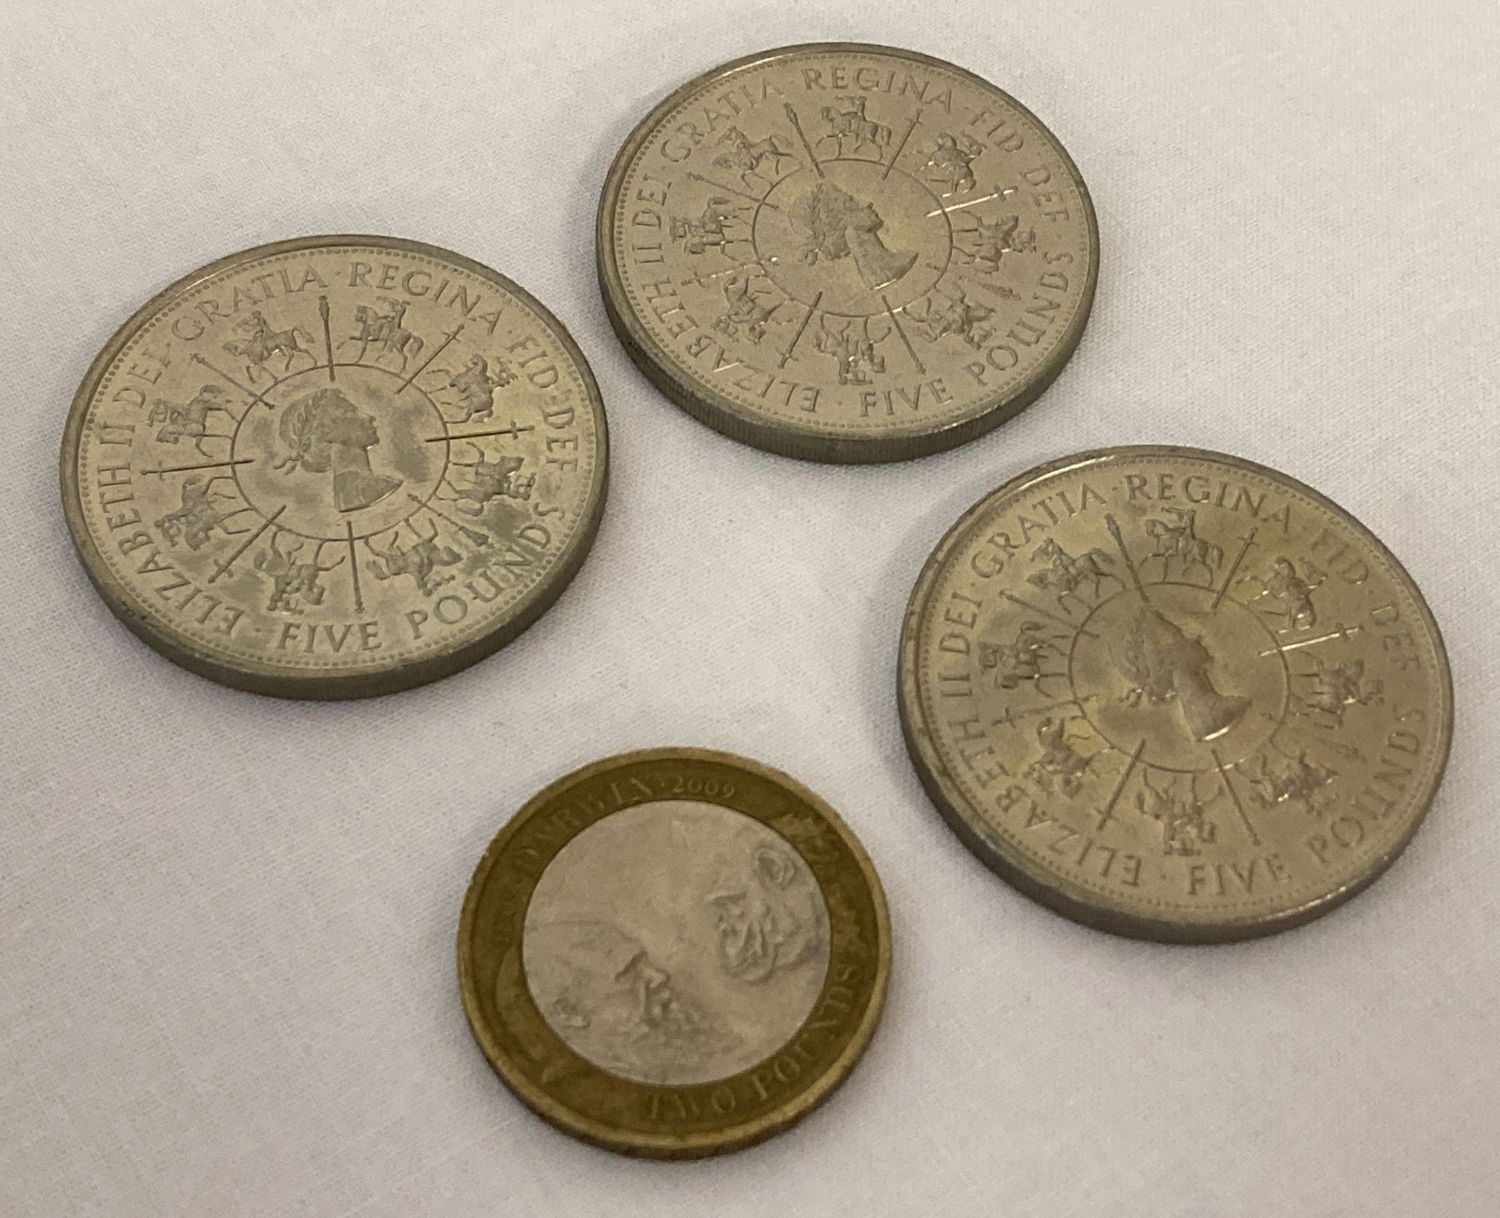 3 x 1993 Bitish £5 coins together with a 2009 "Darwin" £2 coin.